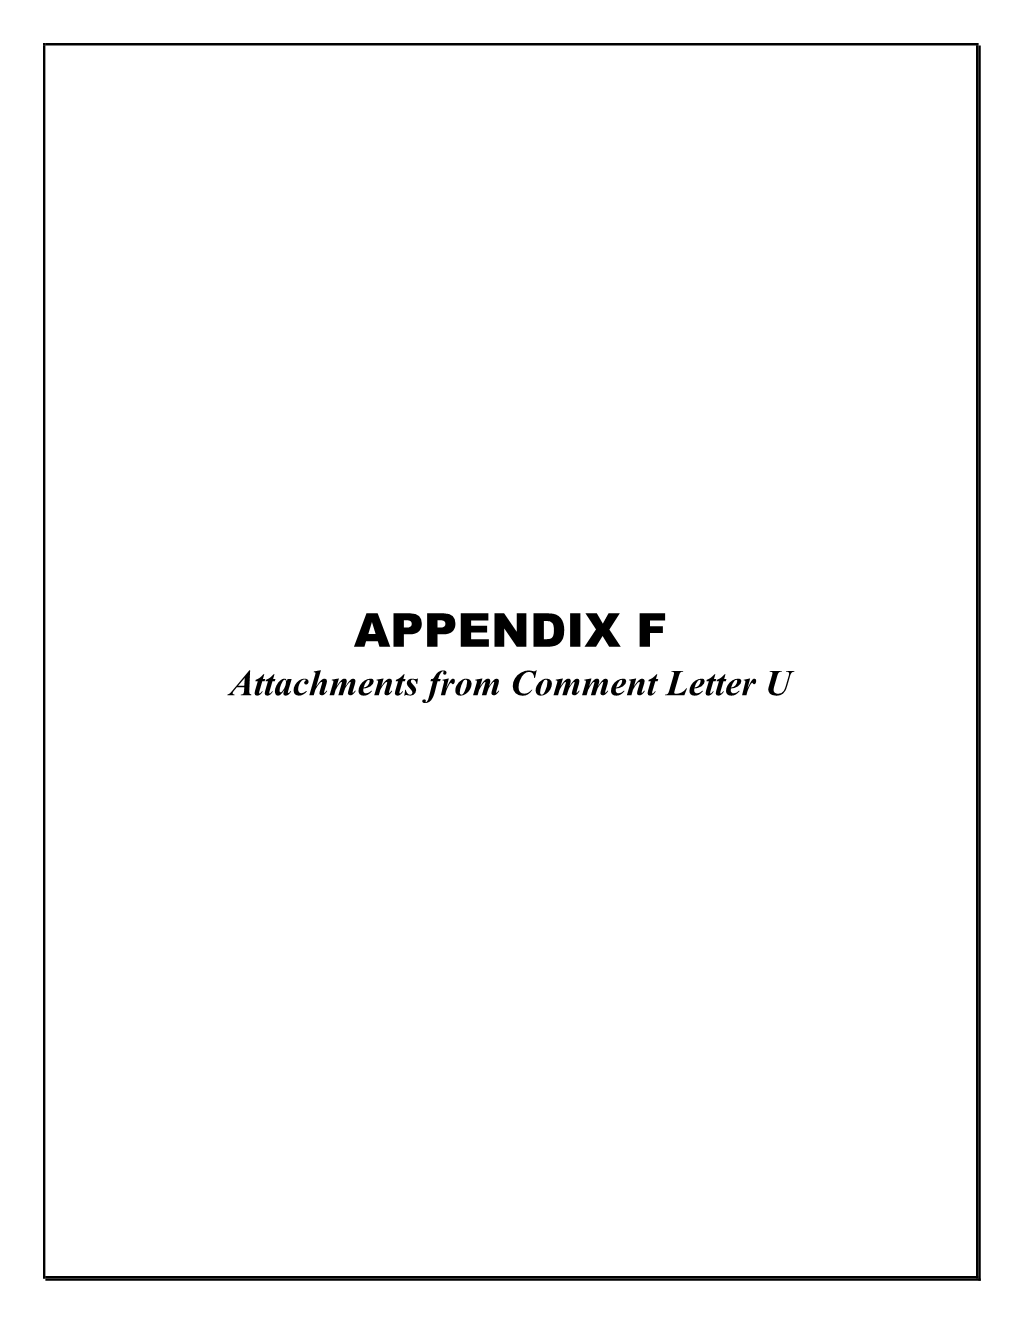 APPENDIX F Attachments from Comment Letter U